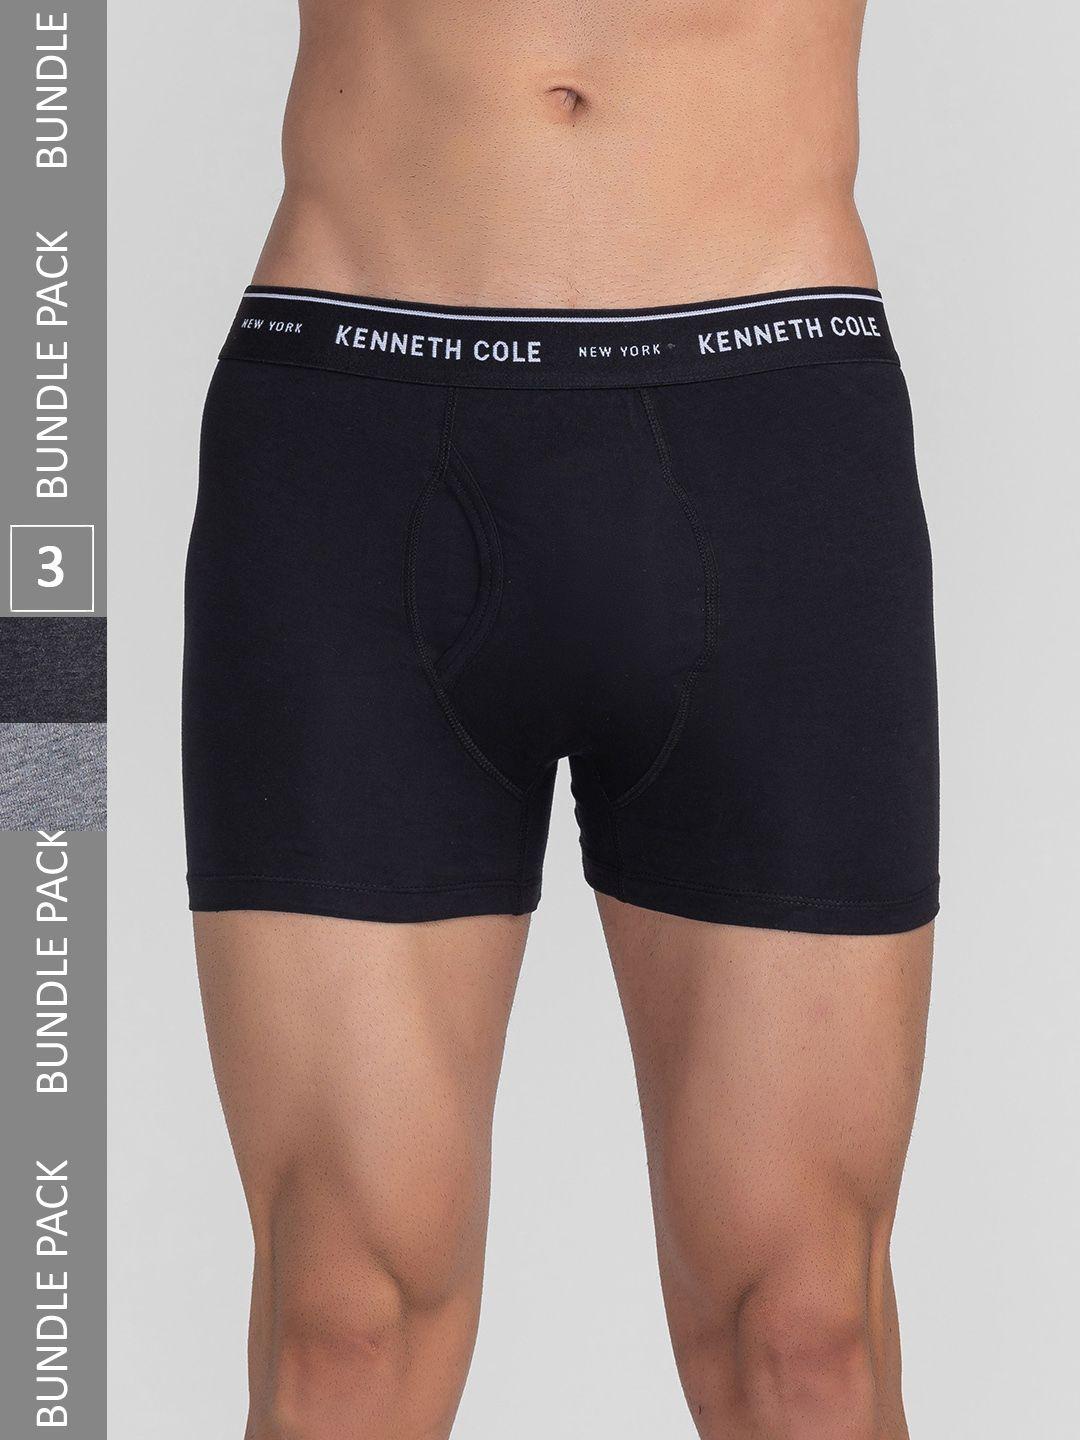 kenneth-cole-men-pack-of-3-brand-name-printed-detail-cotton-trunks